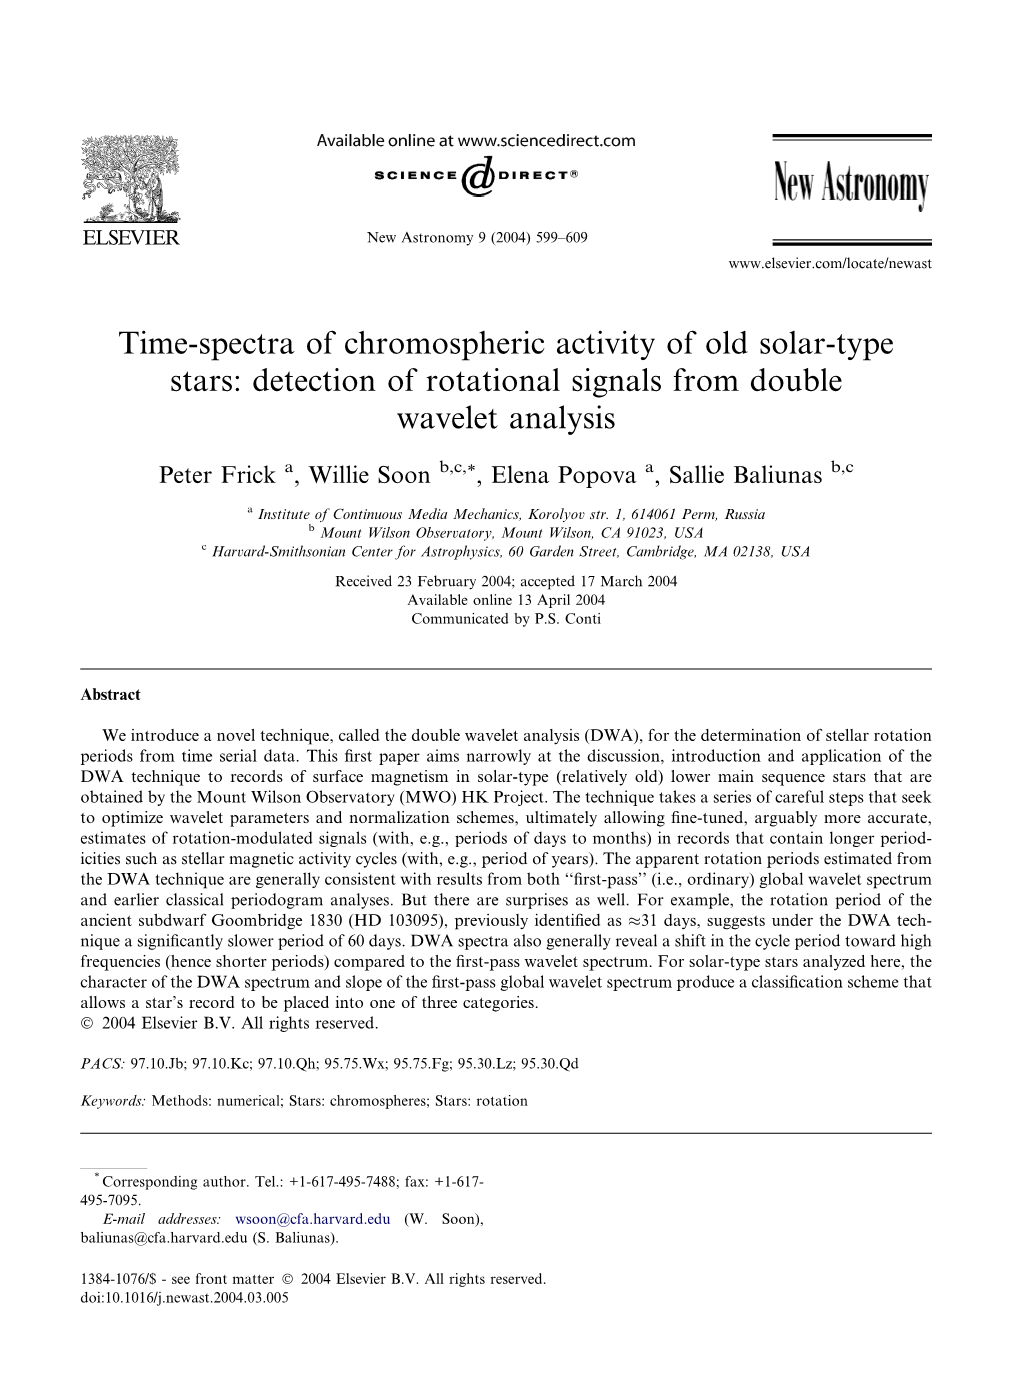 Time-Spectra of Chromospheric Activity of Old Solar-Type Stars: Detection of Rotational Signals from Double Wavelet Analysis